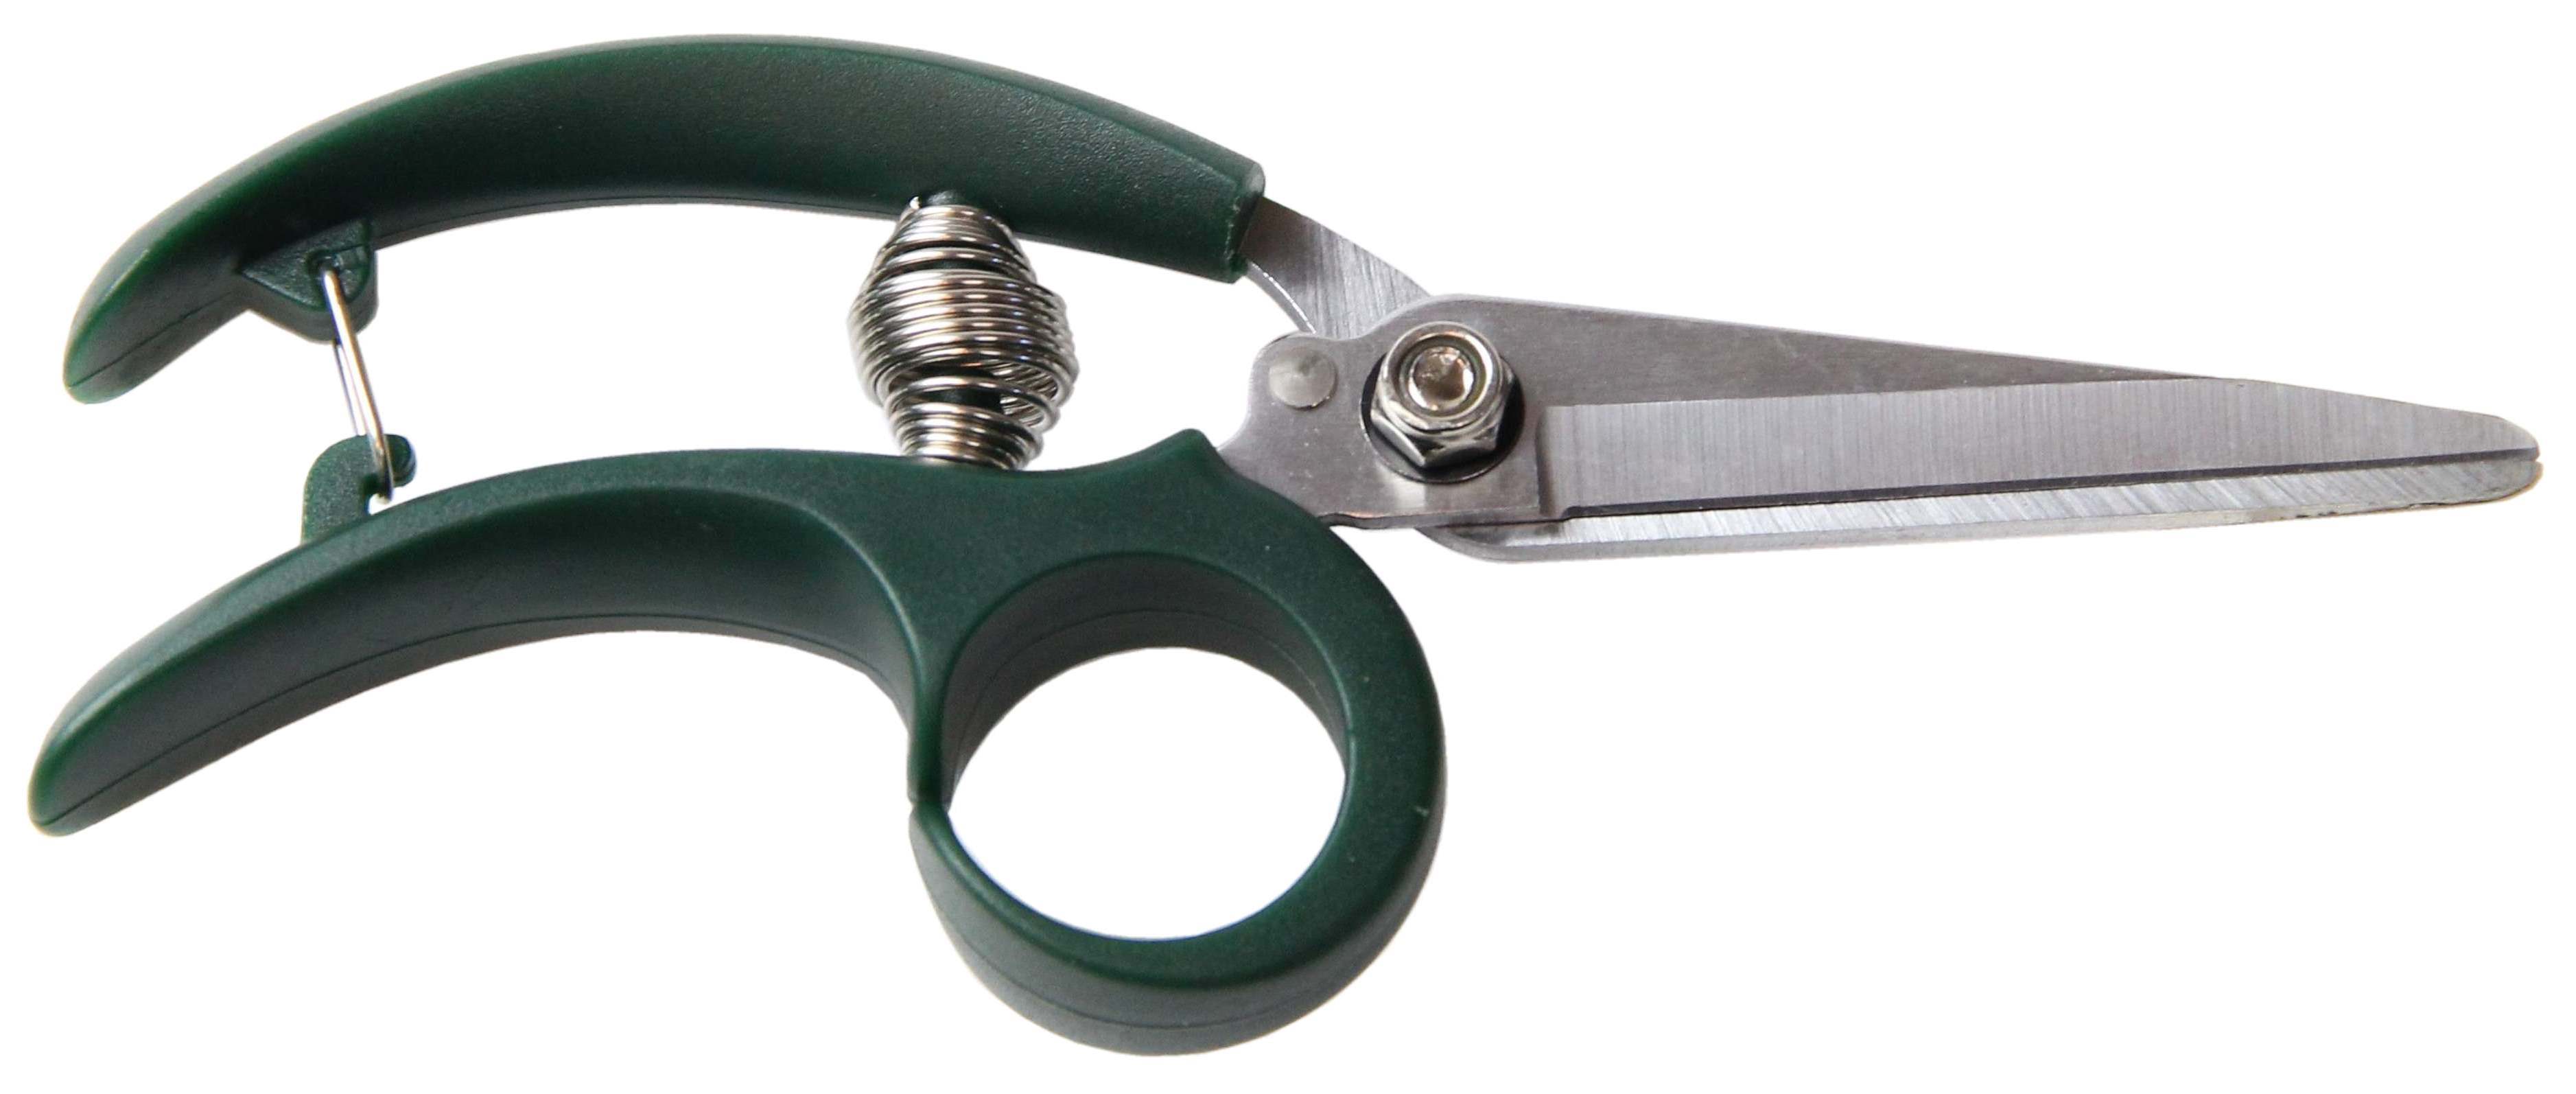 6” Straight Ring Shear  (Pruners)